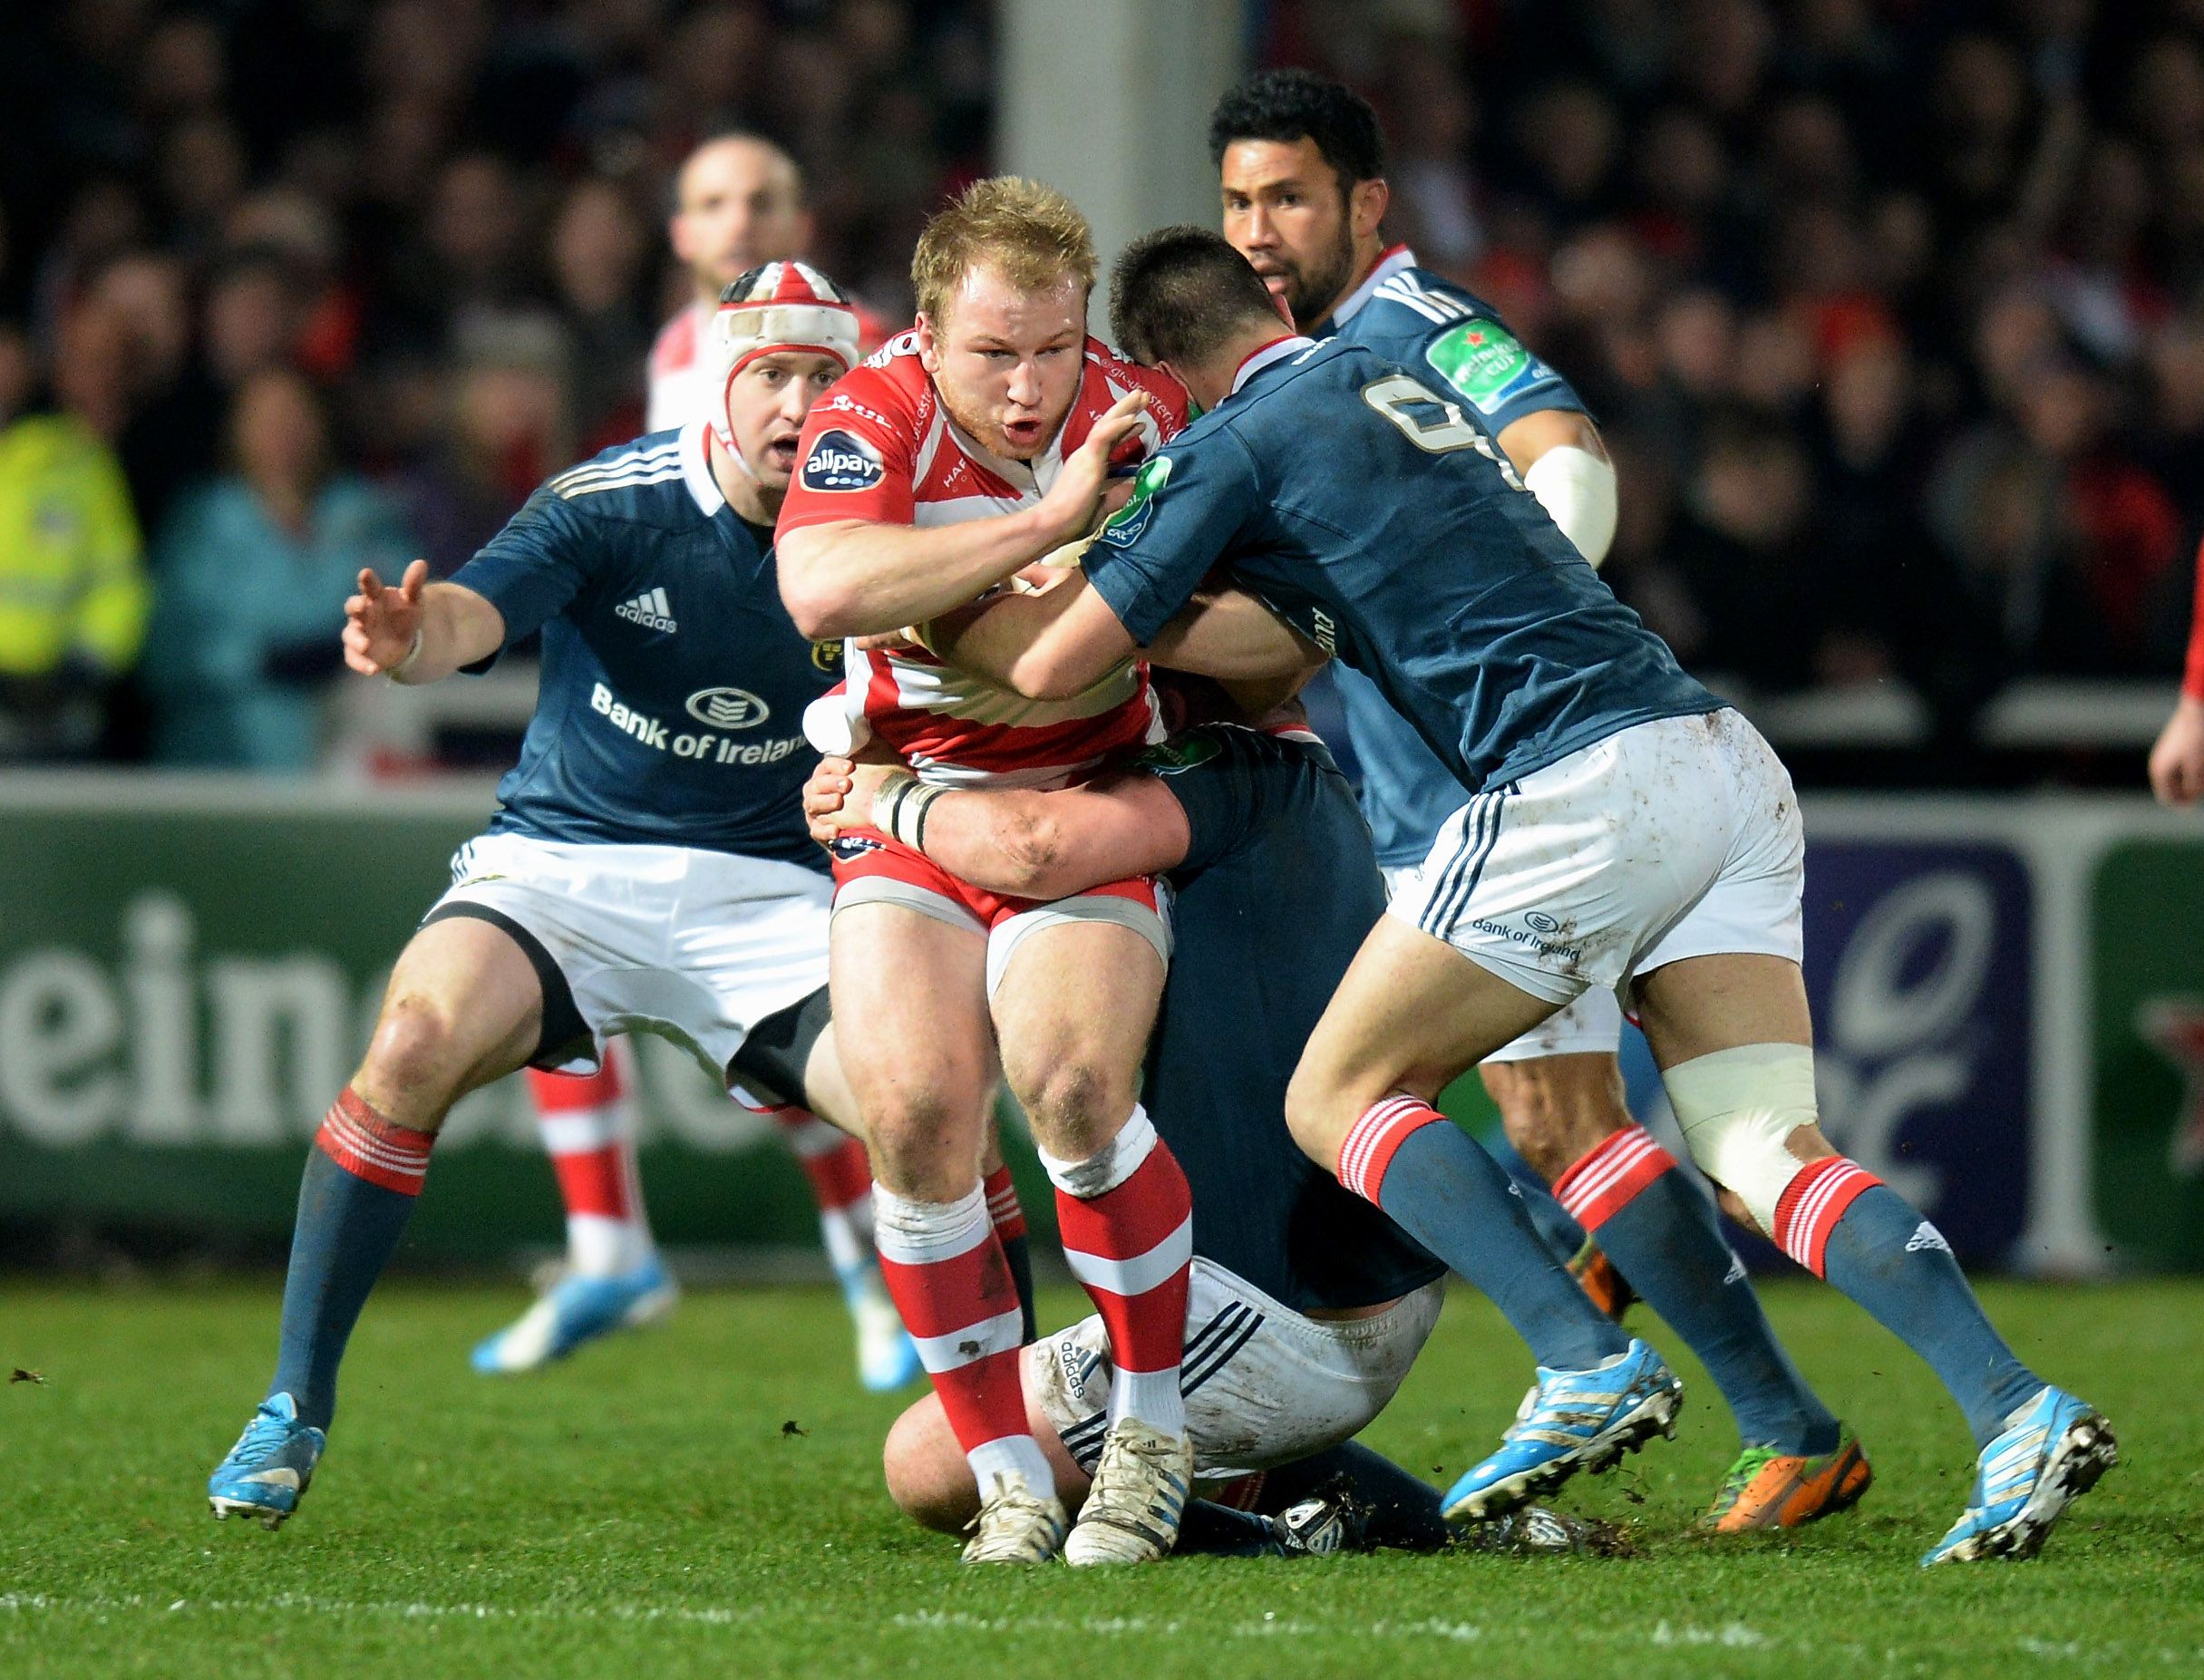 GLOUCESTER, ENGLAND - JANUARY 11: Matt Kvesic of Gloucester tackled by Conor Murray of Munster during the Heineken Cup Pool Six match between Gloucester and Munster at Kingsholm Stadium on January 11, 2014 in Gloucester, England. (Photo by Tony Marshall/Getty Images)